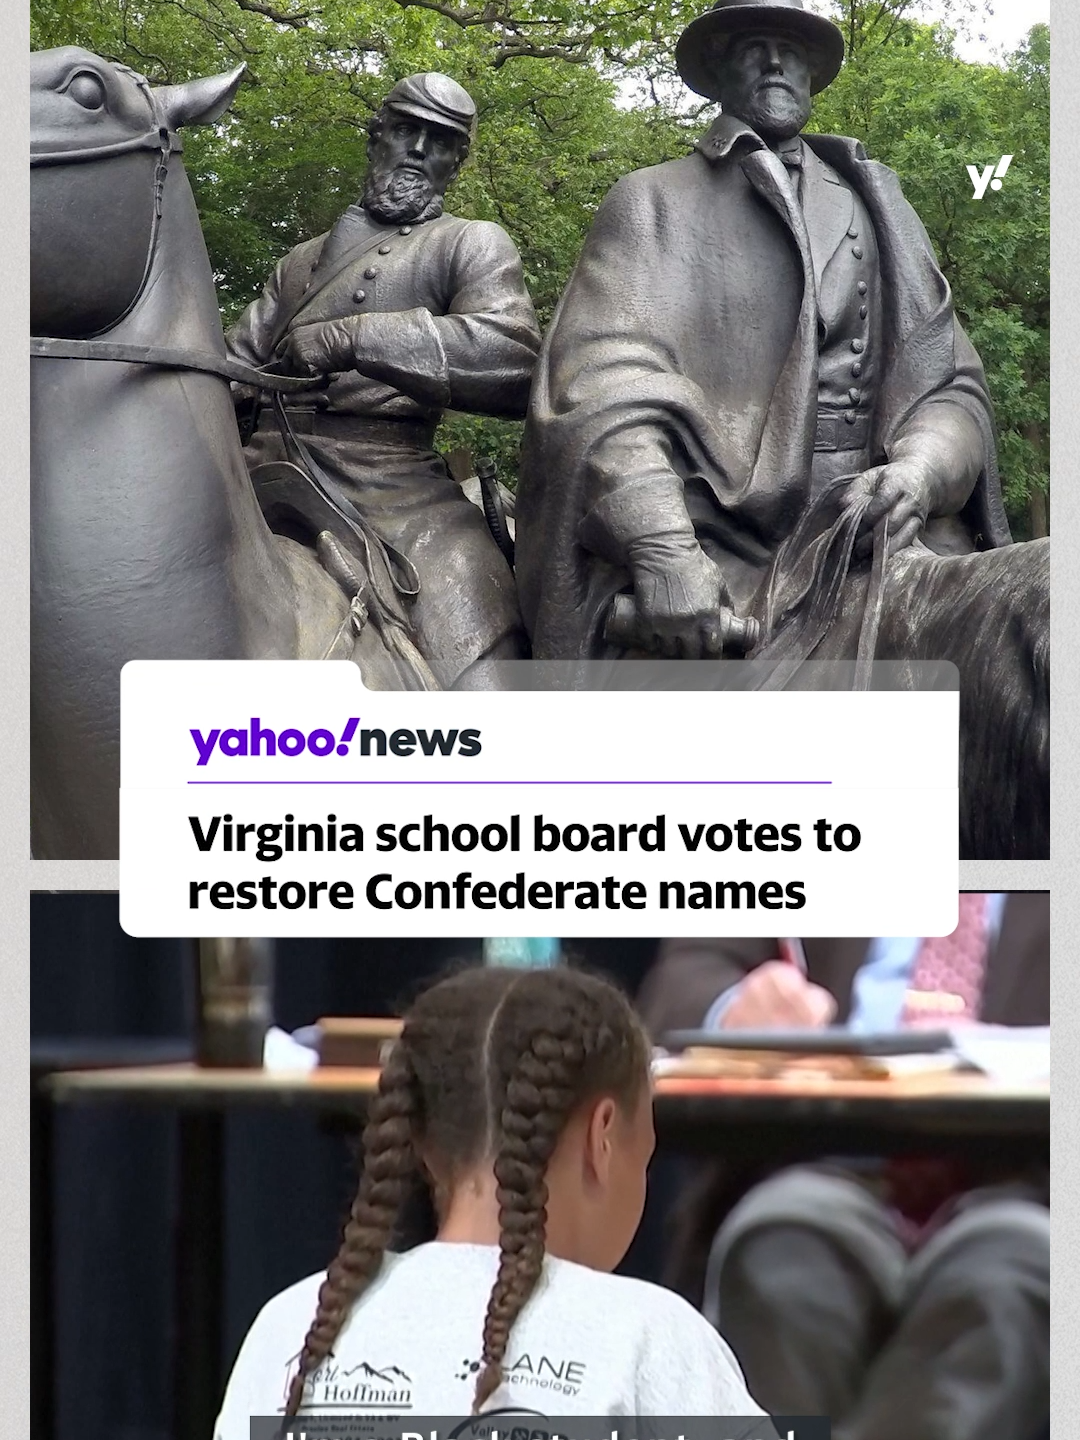 A Virginia school board voted to restore the names of Confederate military leaders to two public schools, becoming the first in the U.S. to take such an action. #news #virginia #schoolboard #yahoonews